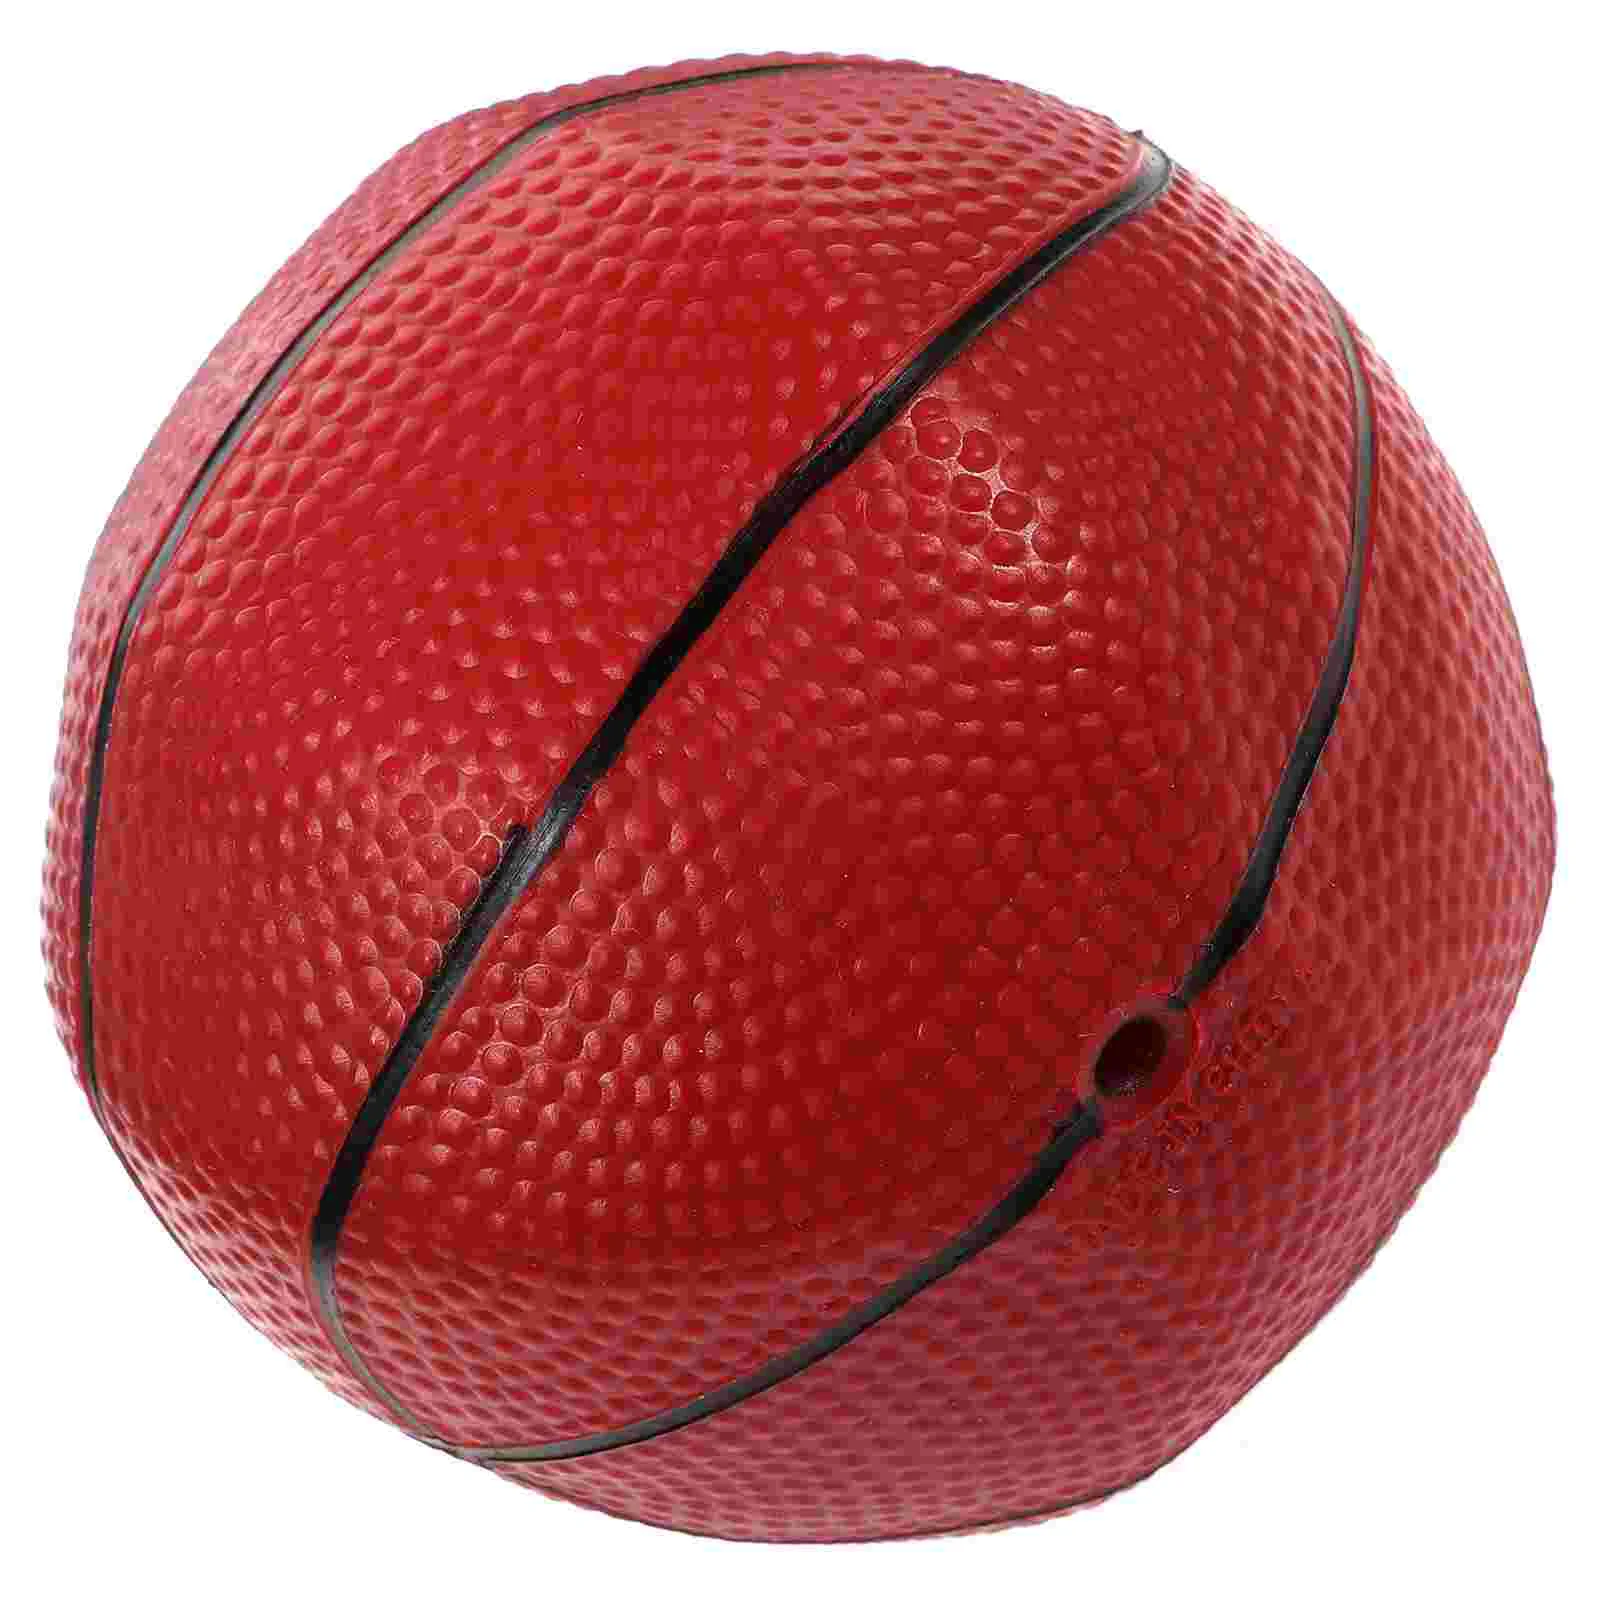 13cm Mini Inflatable Bouncy Basketball Indoor Outdoor Sports Ball Jumping Stress - £10.28 GBP